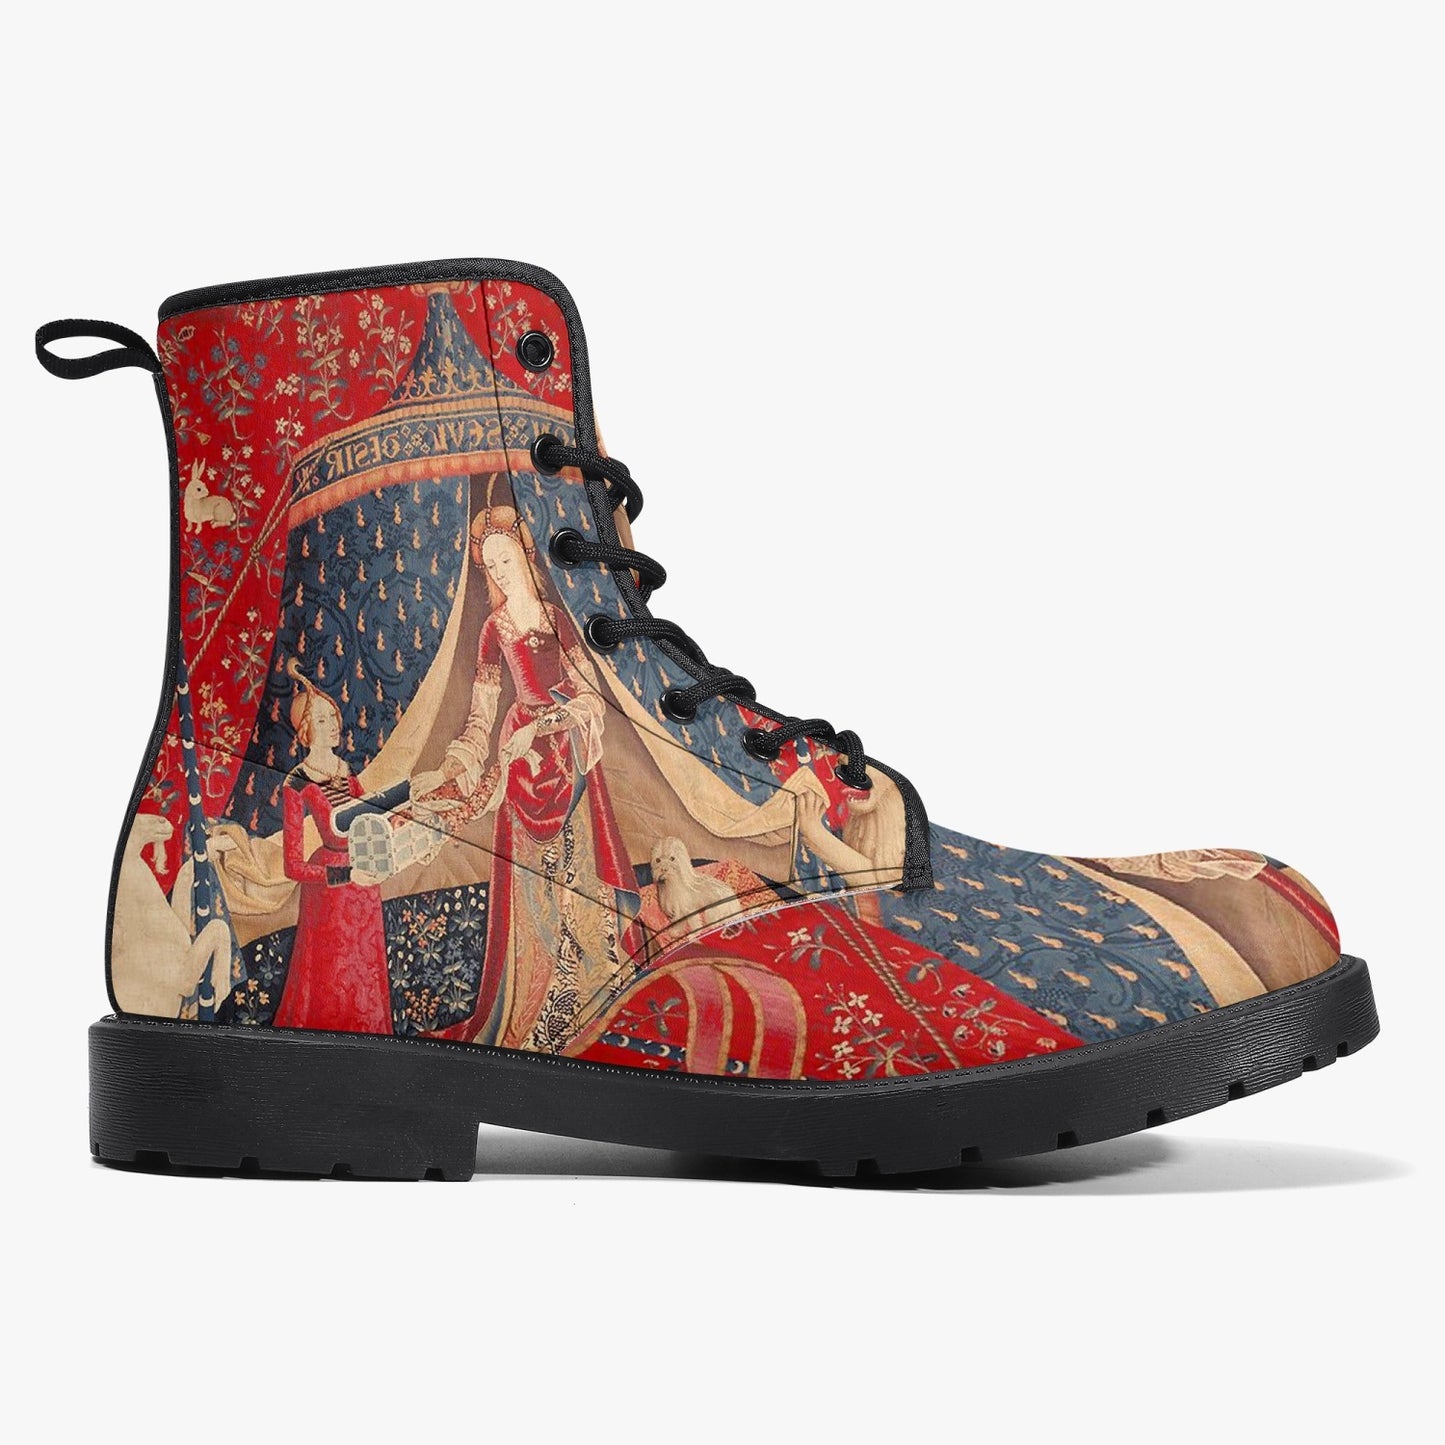 The Lady and the Unicorn Vegan leather Combat Boots - Mon Seul Desir Tapestry Boots for Art Lover (JPREG75)